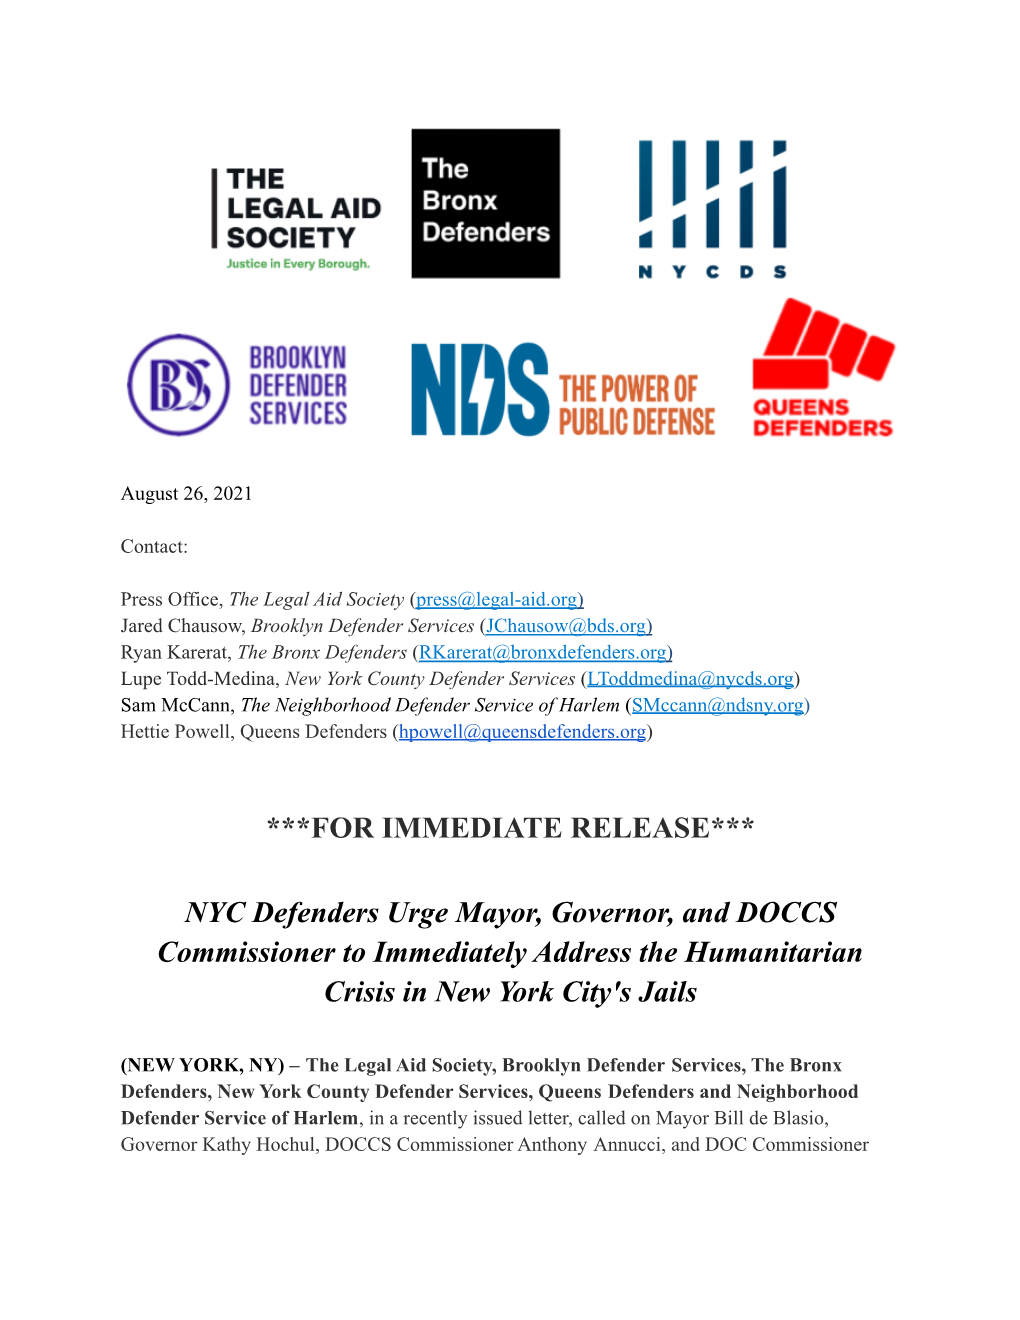 08 26 21 NYC Defenders Urge Mayor, Governor, and DOCCS